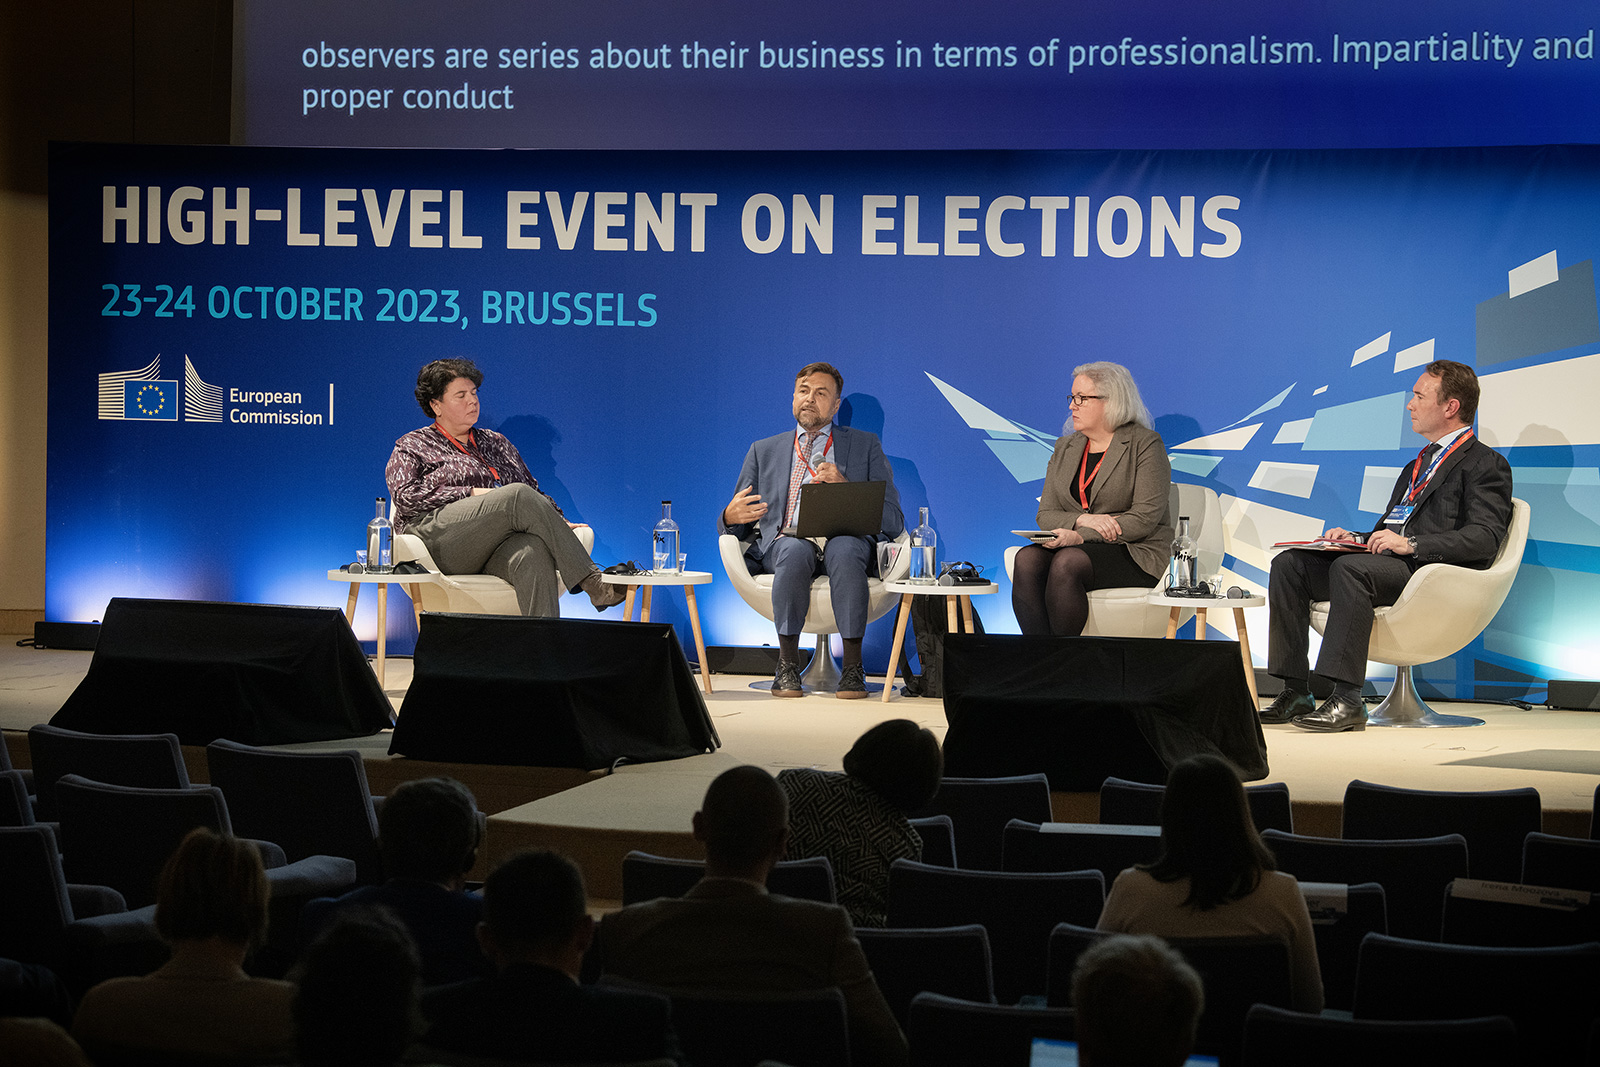 On 23-24 October 2023, President of ENEMO Ana Mihajlovic spoke at the High-level event organized by the EU Commission in Brussels on "Election observation for fair transparent electoral processes".